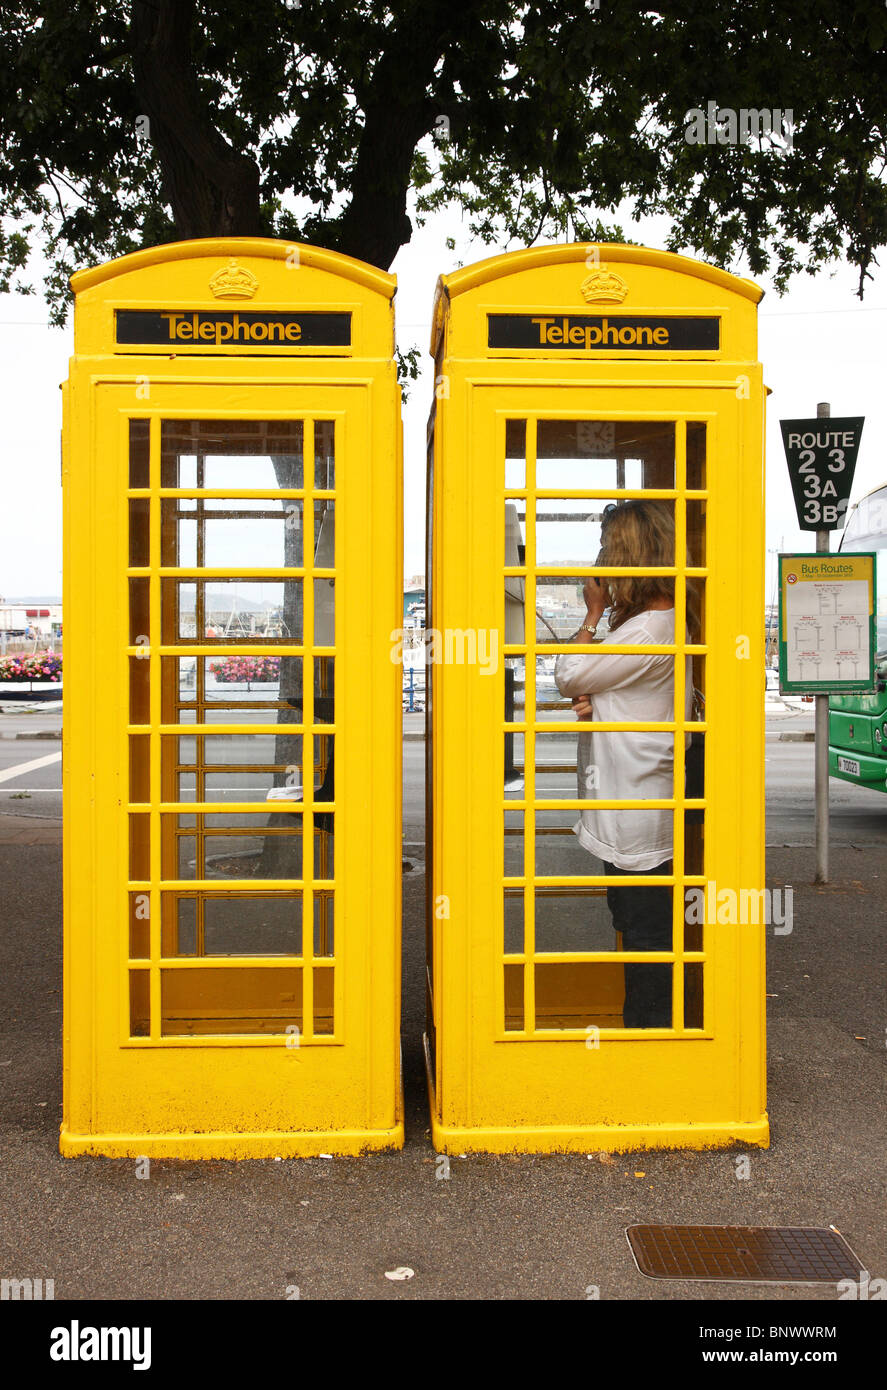 Typical yellow phone booth, St. Peter Port, Guernsey, Channel Islands, UK, Europe. Stock Photo